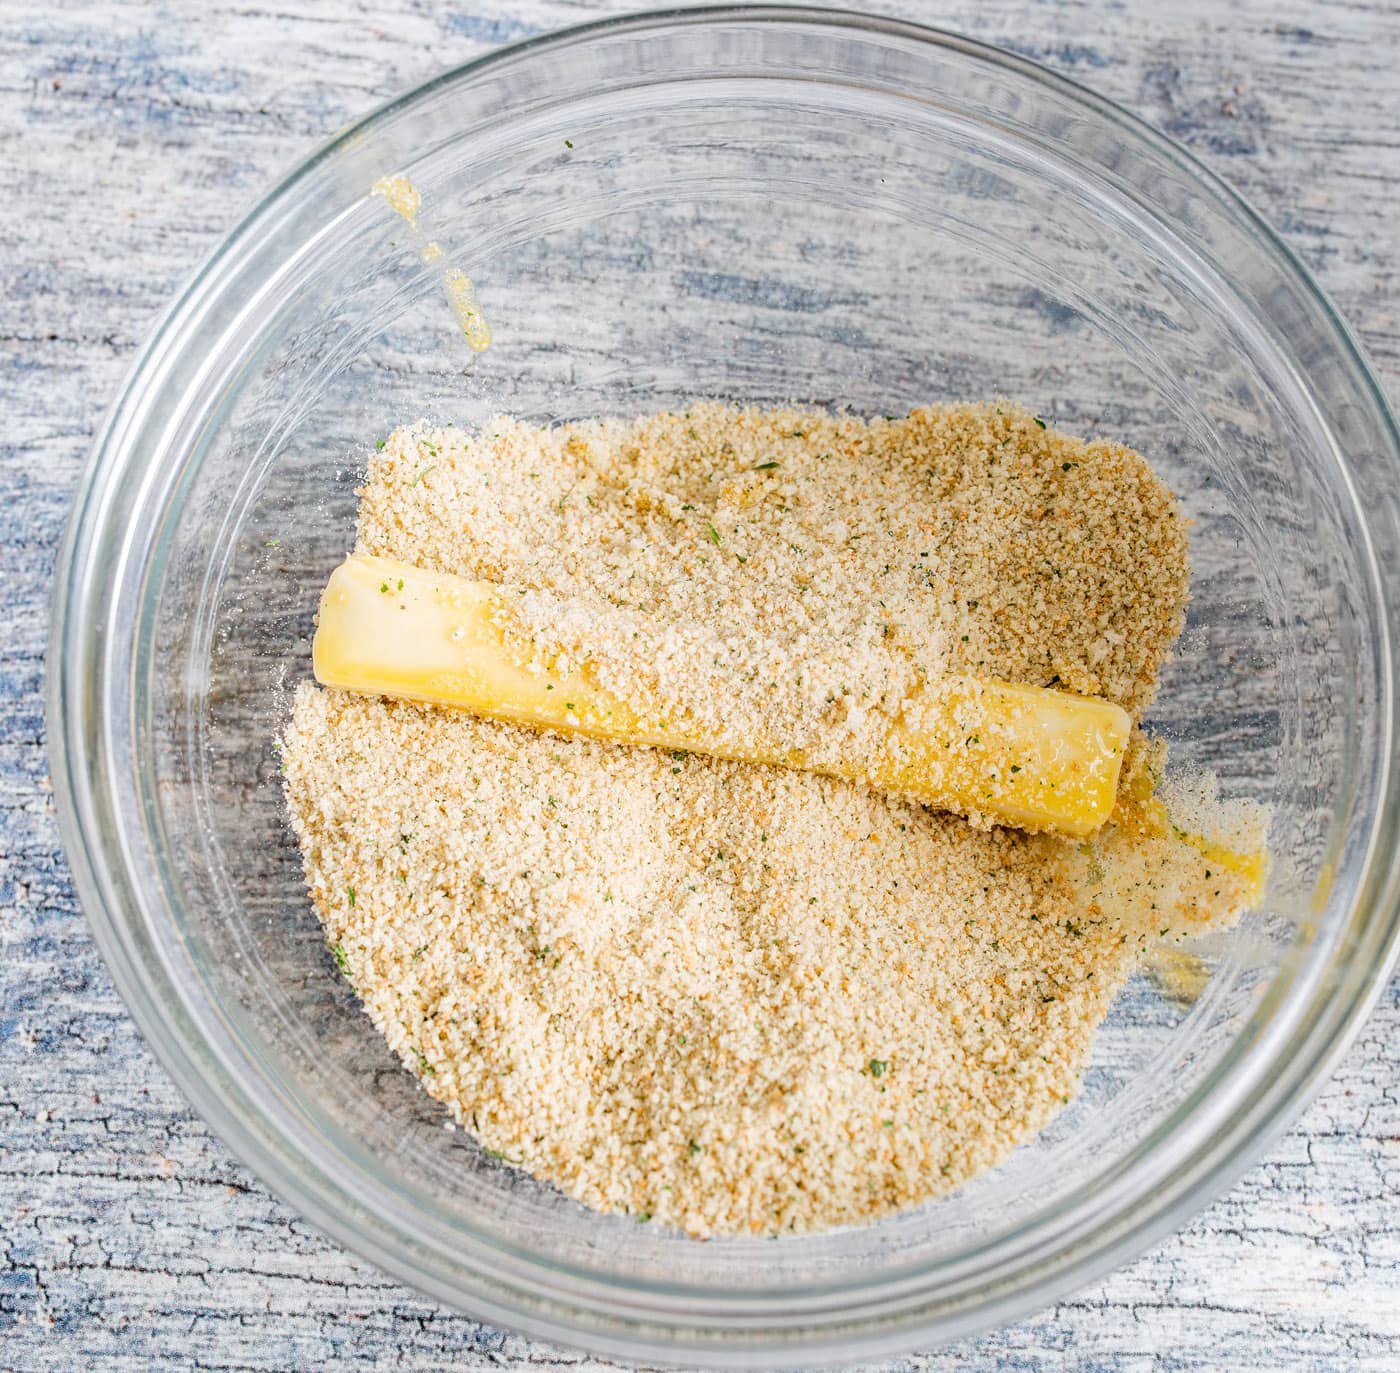 cheese stick in bread crumbs